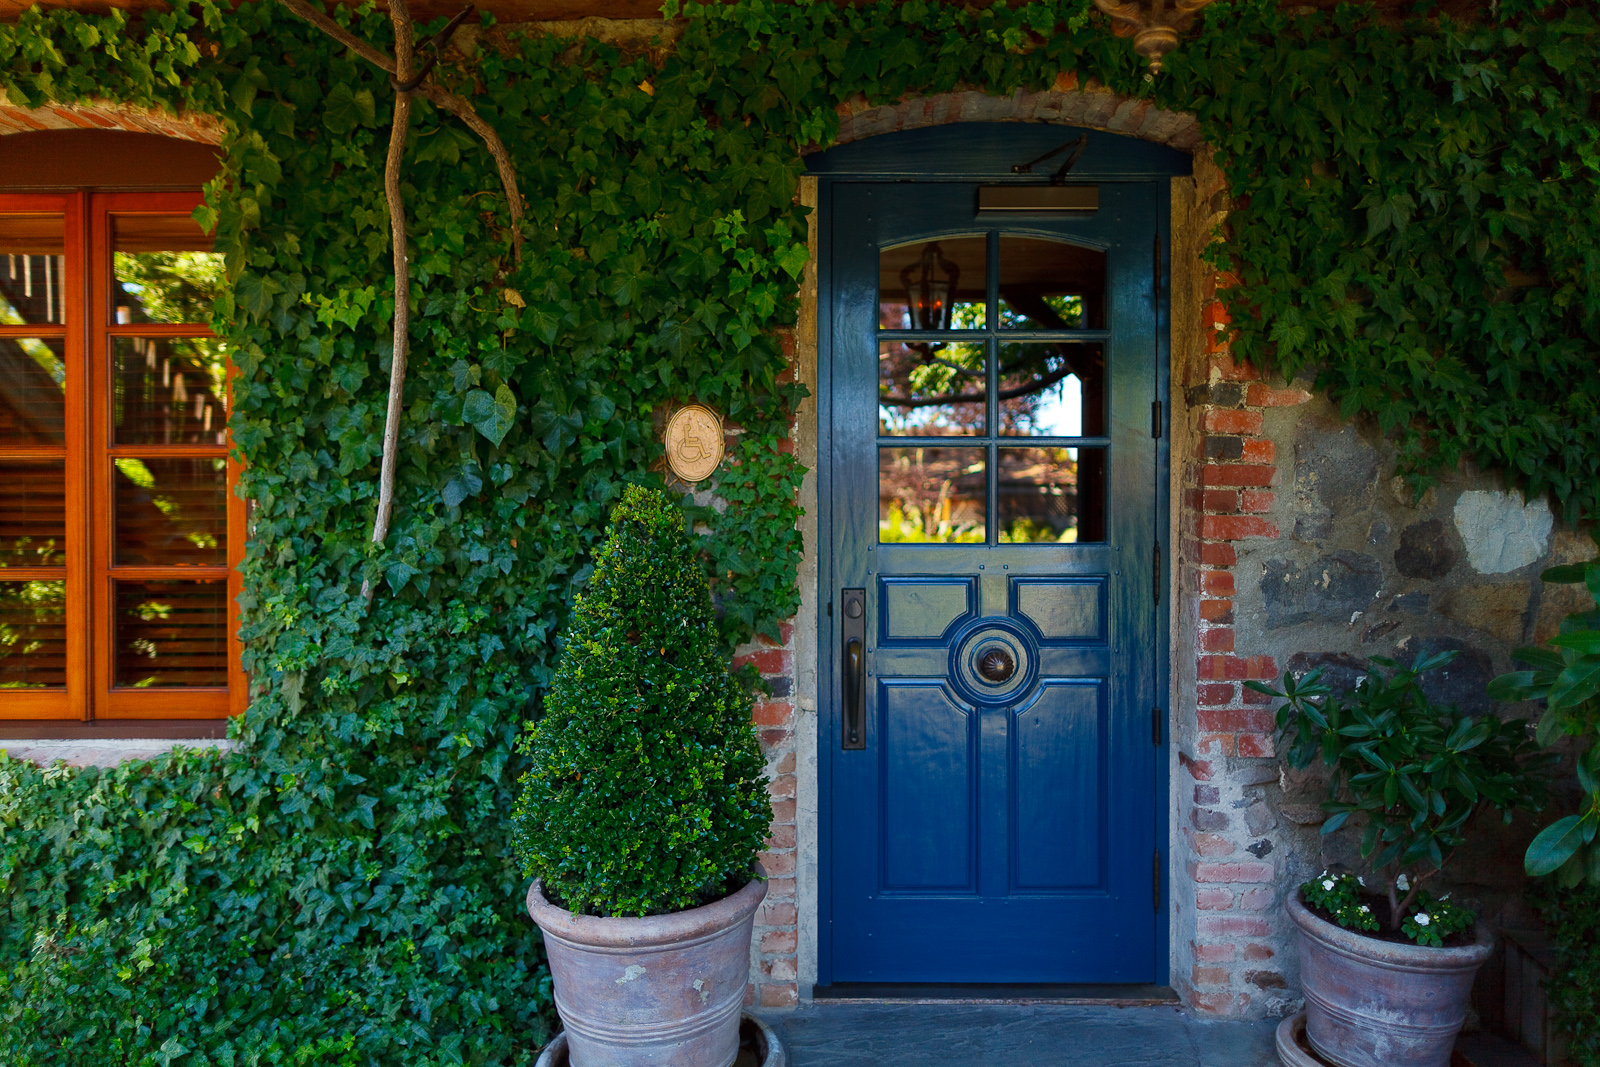 Entrance to the French Laundry